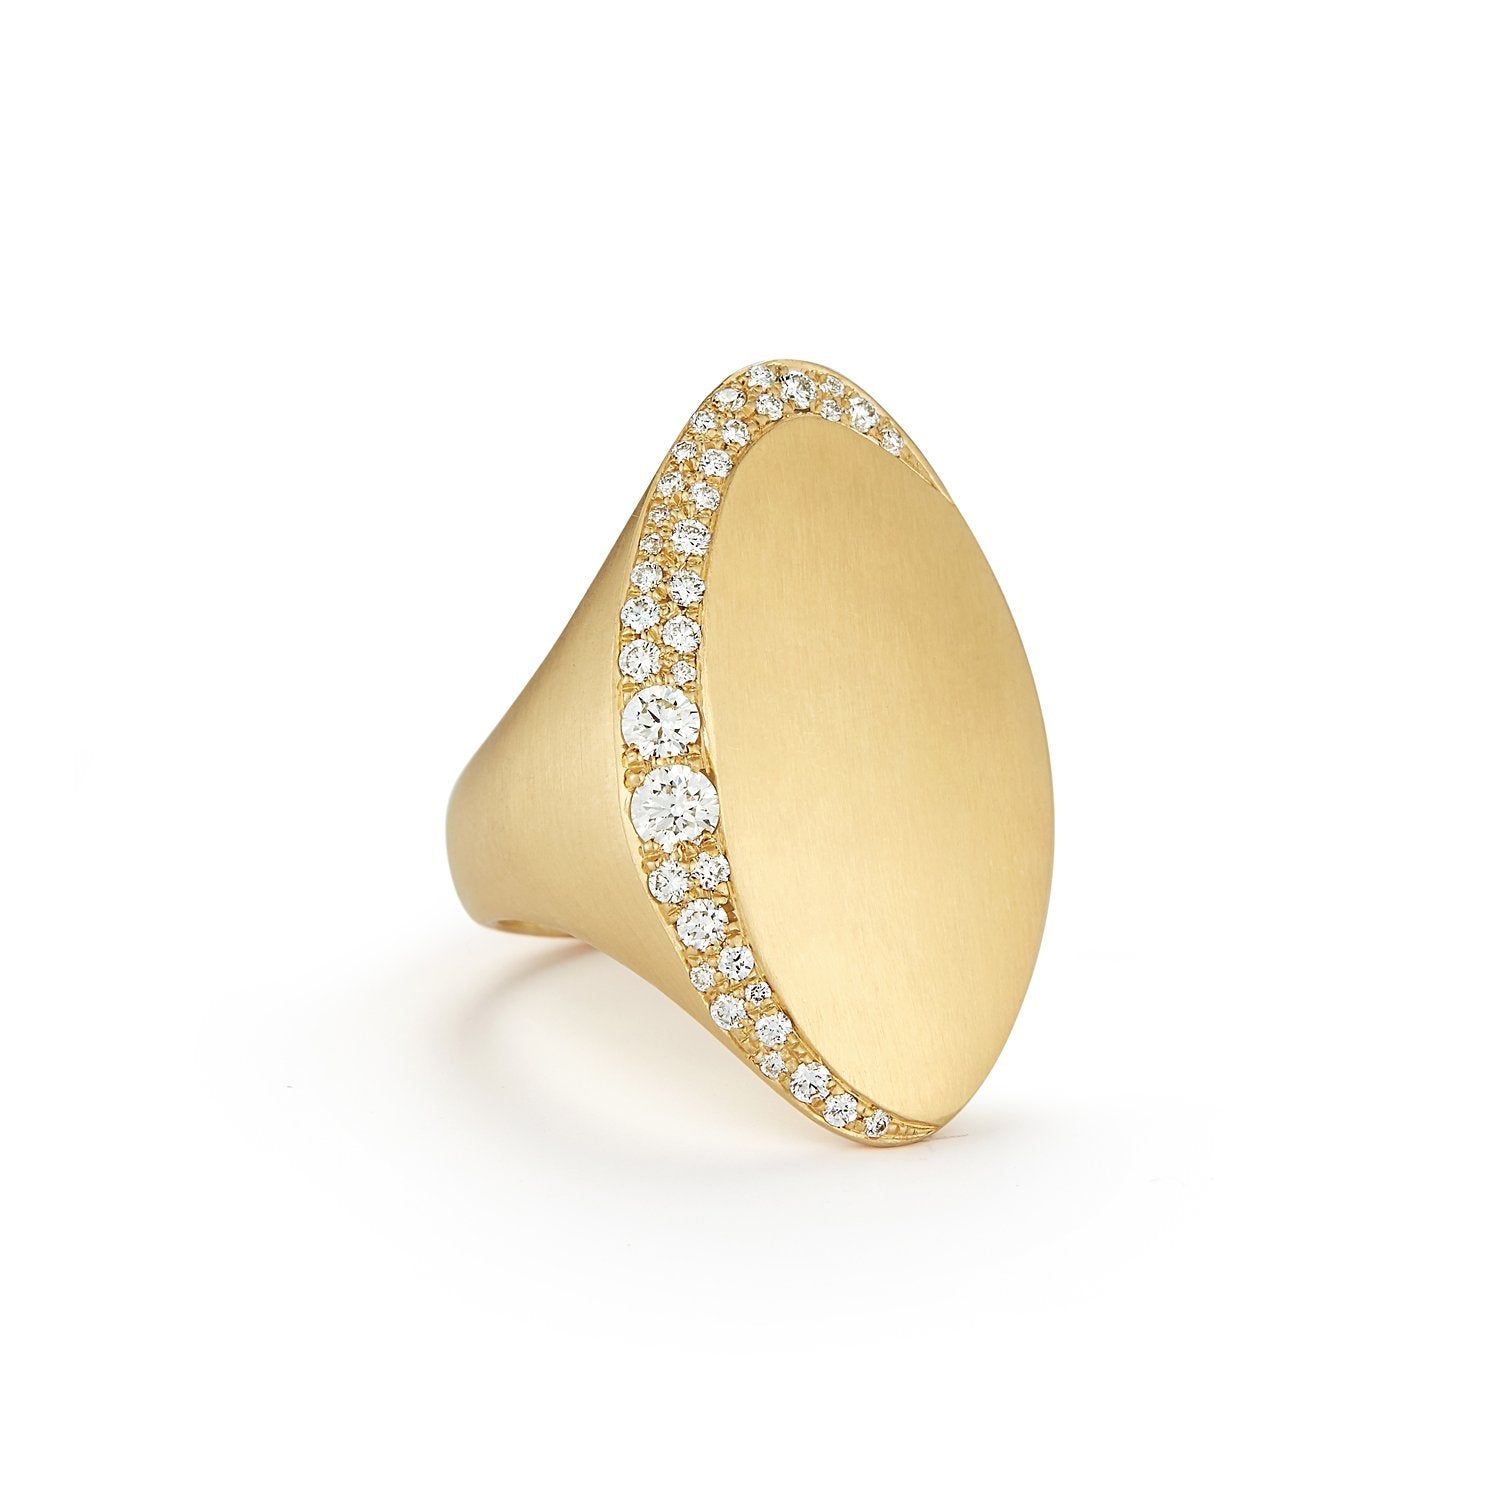 Adele Diamond Cocktail Ring in 18K Yellow Gold